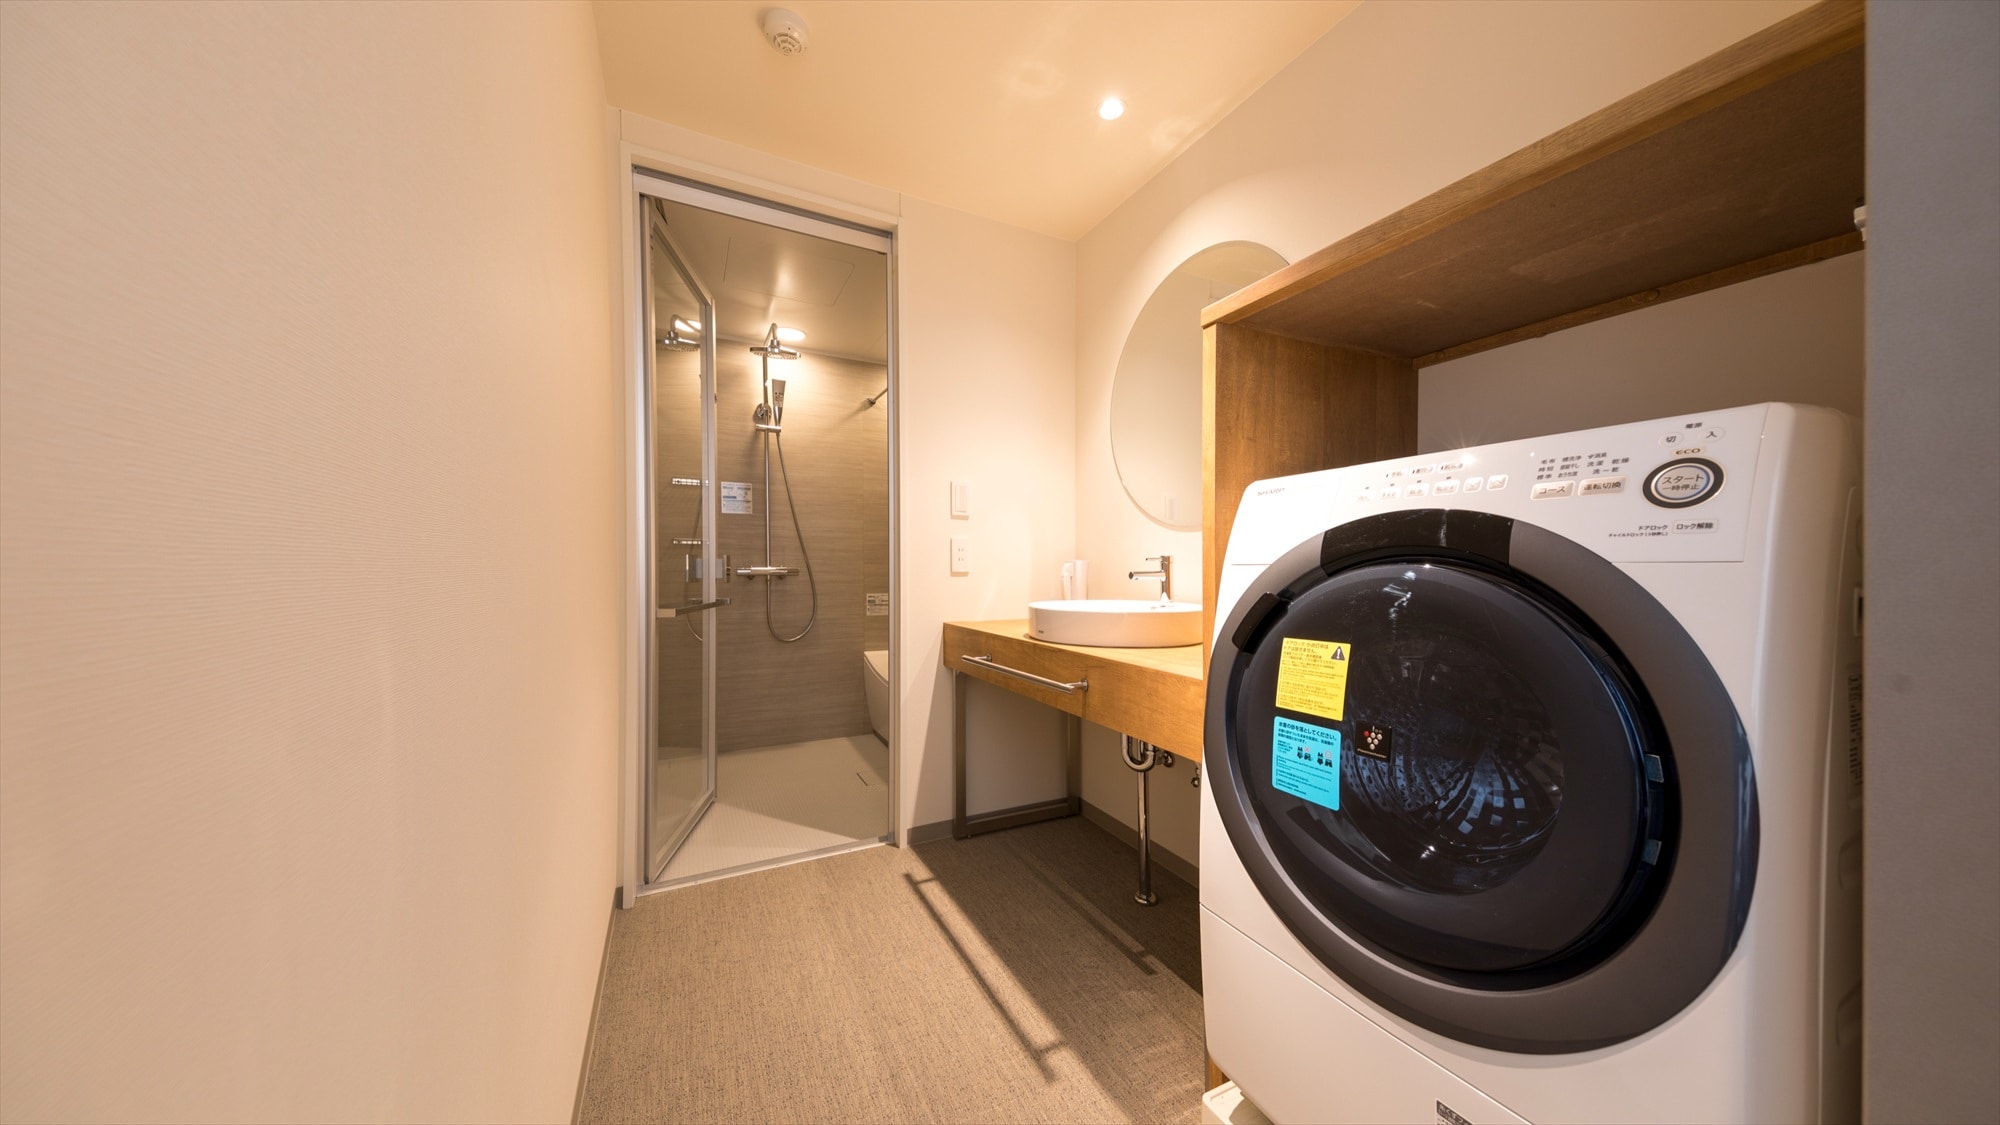 A comfortable stay with a washer/dryer